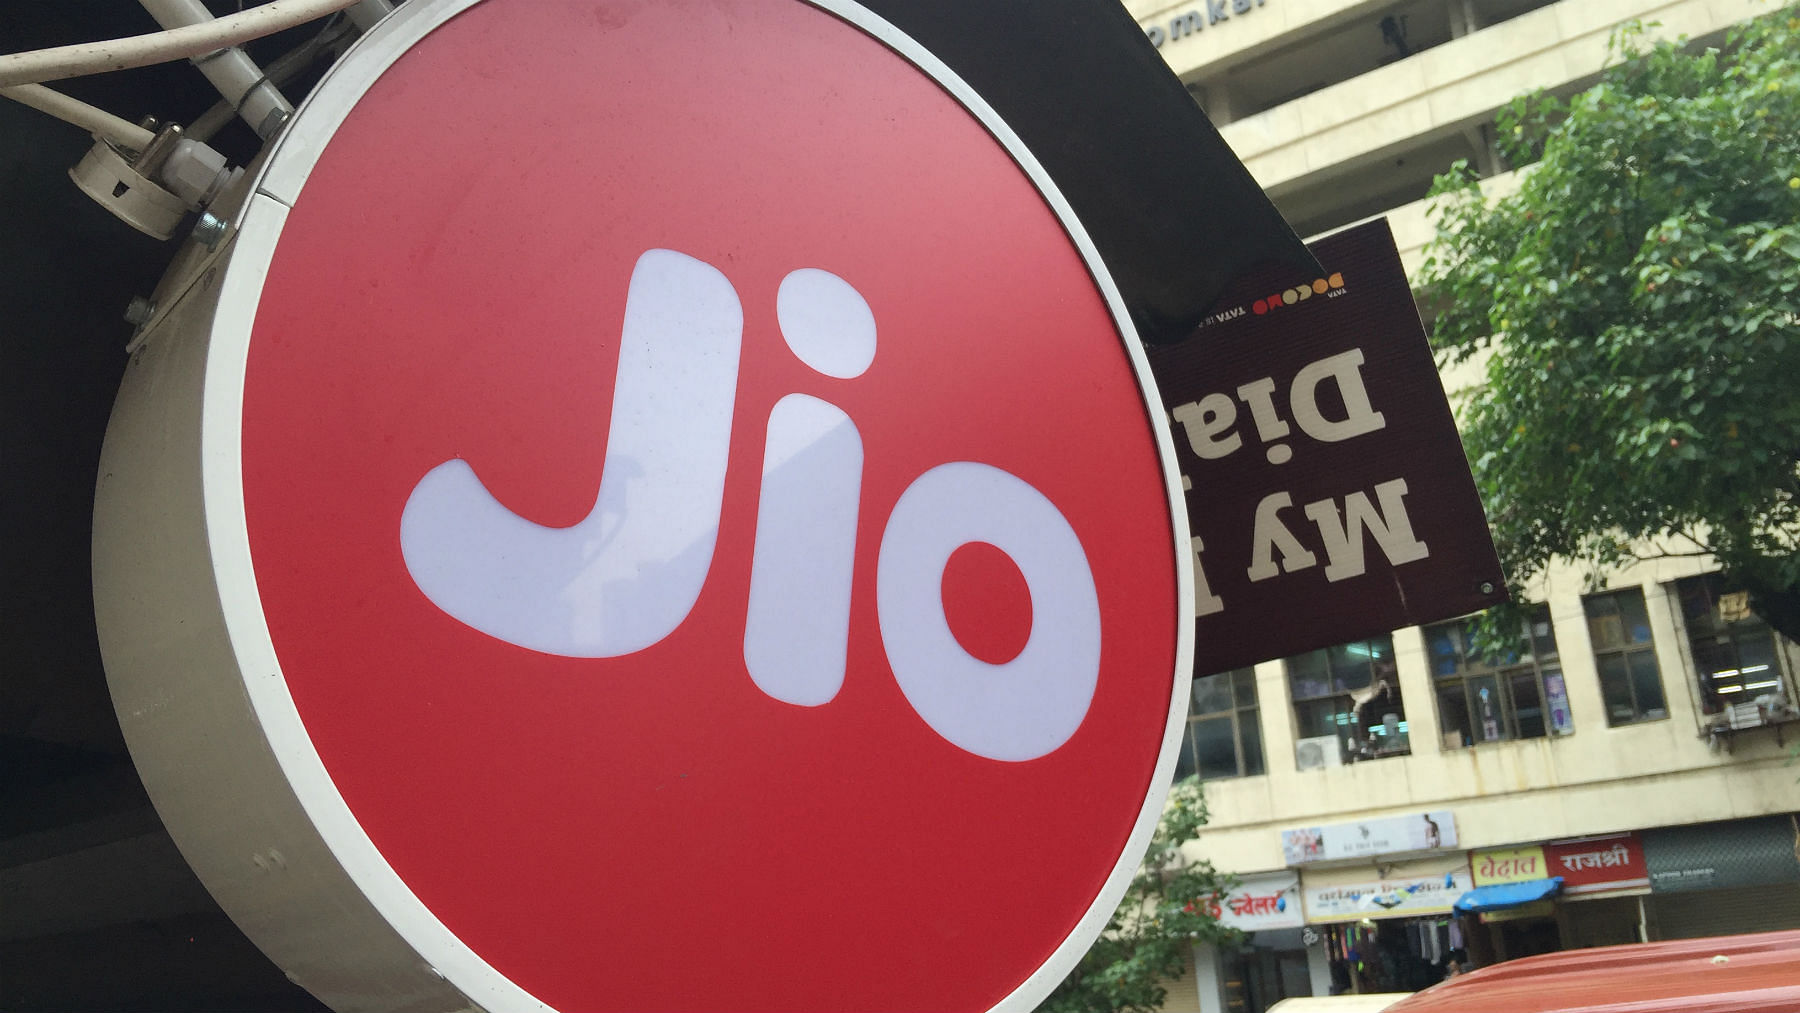 Fake offers about Reliance Jio have become a nuisance now.